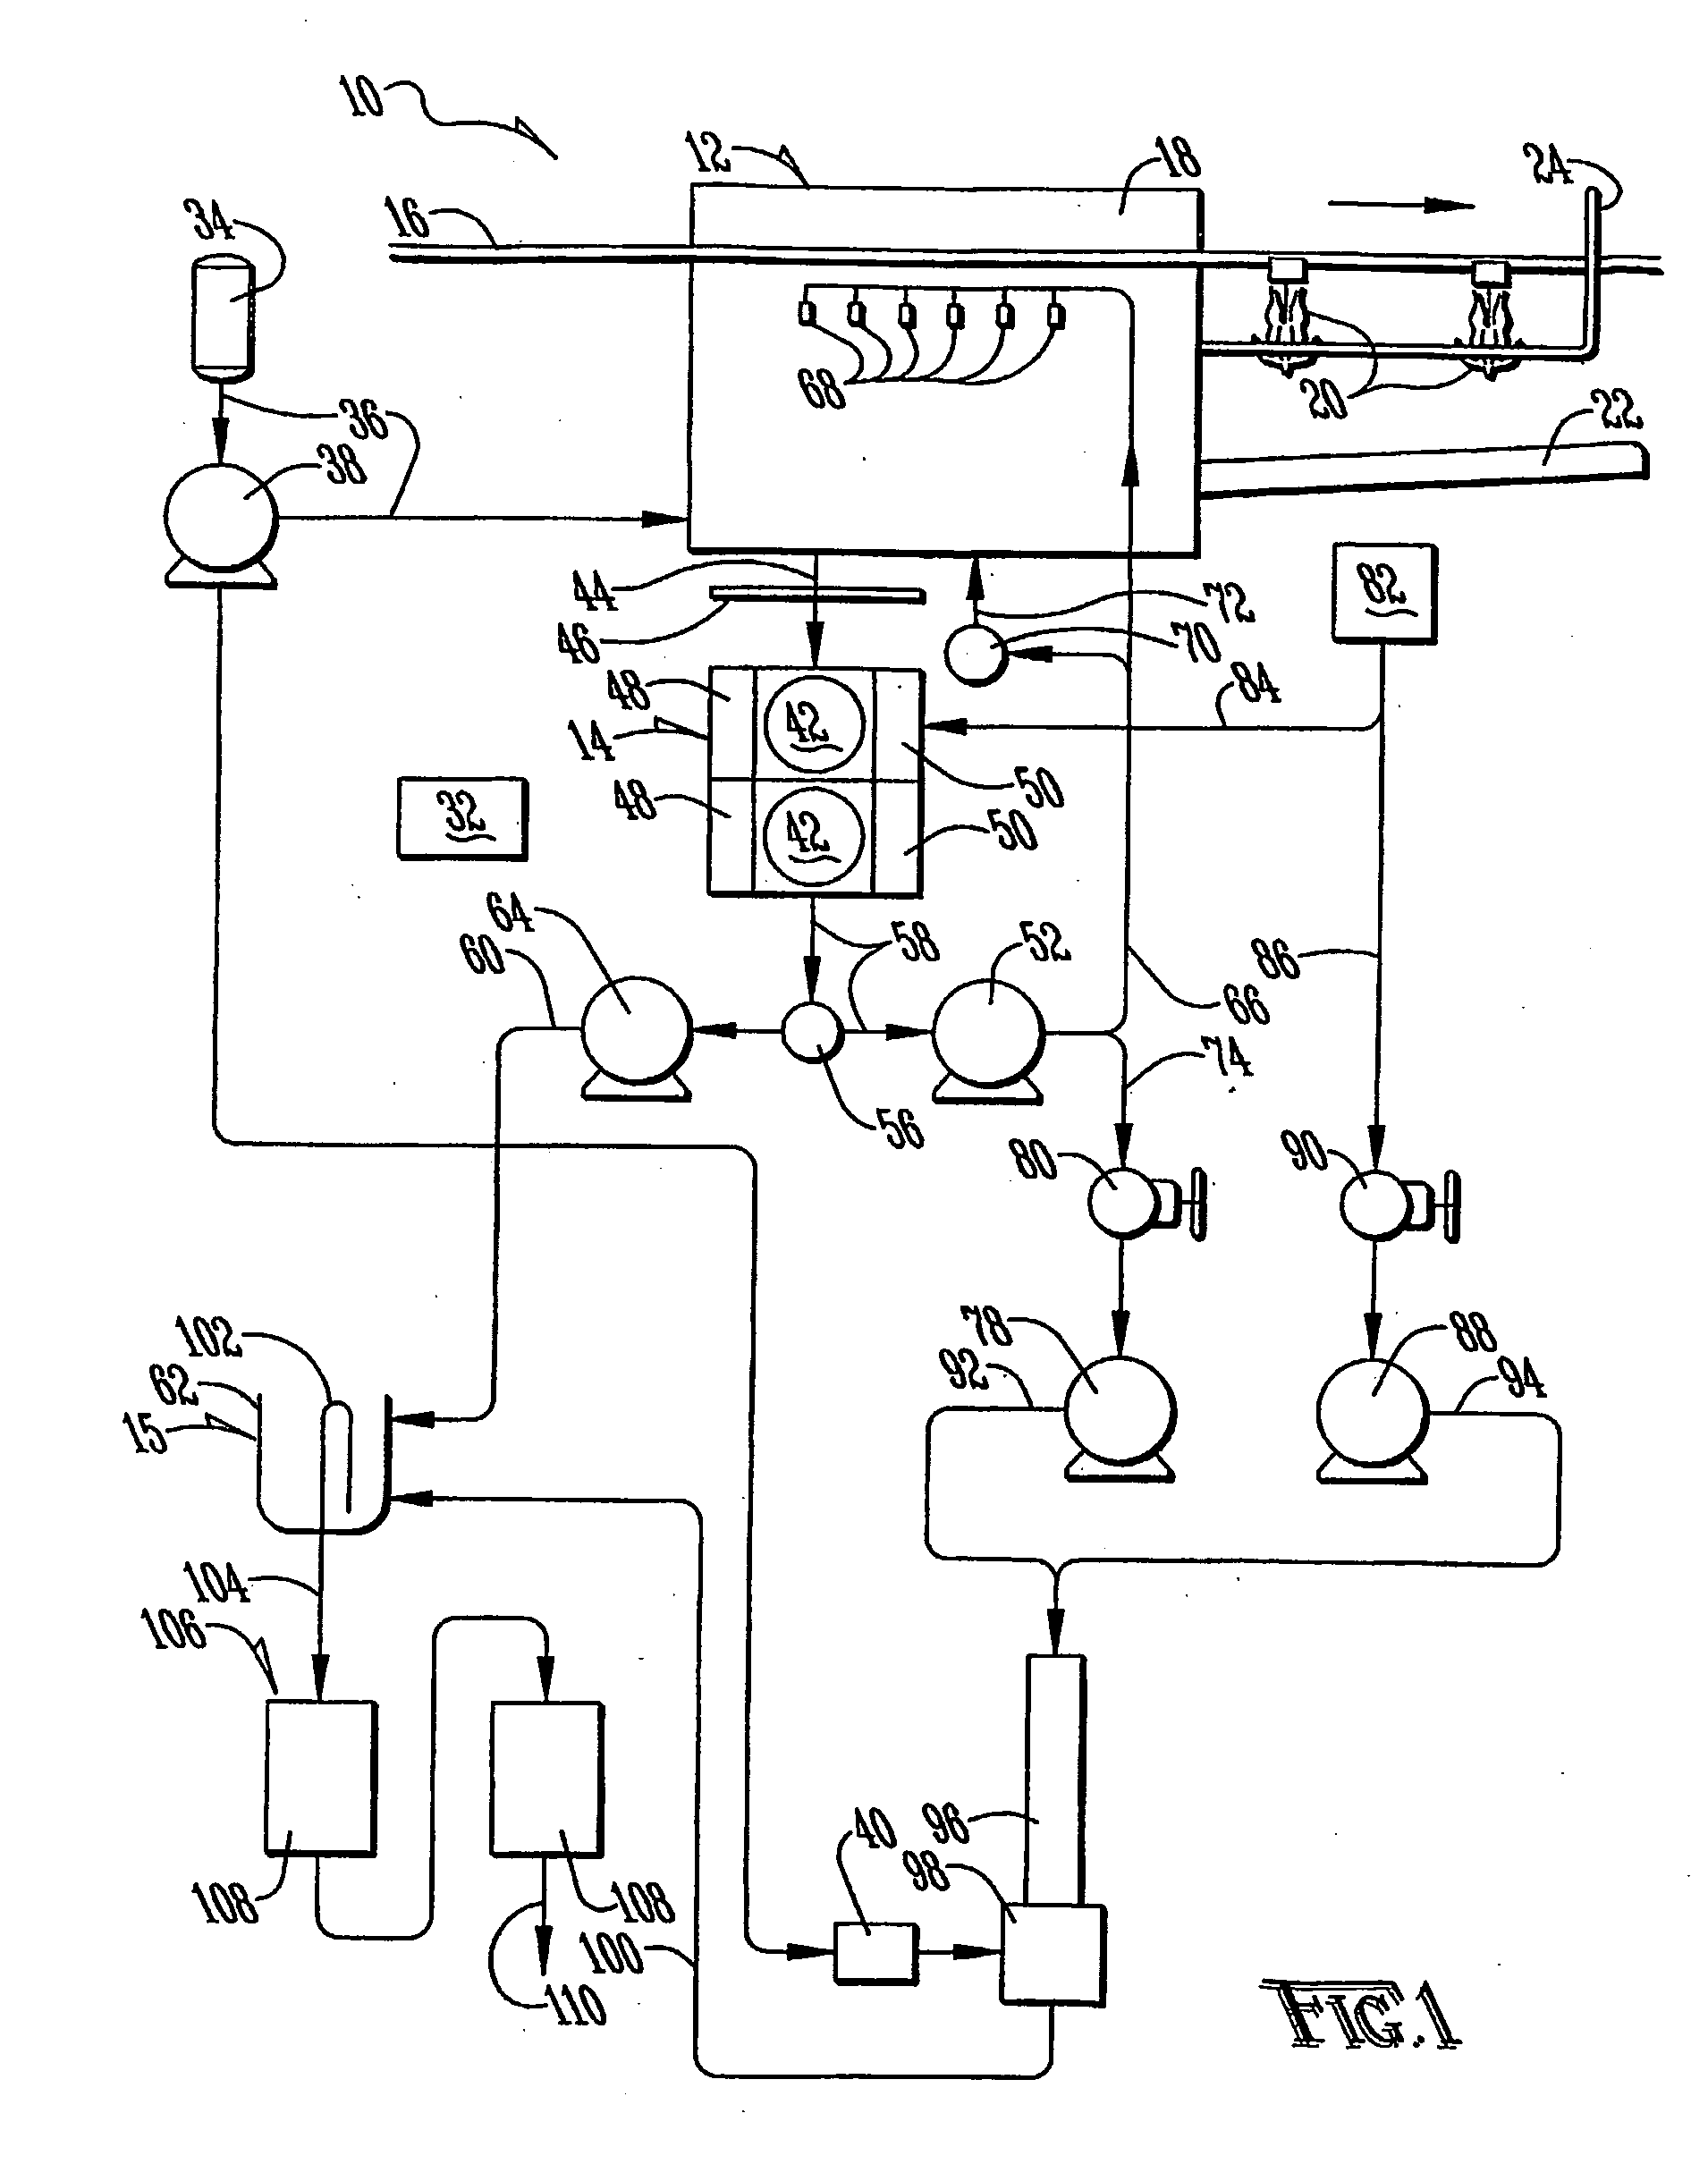 Application System With Recycle and Related Use of Antimicrobial Quaternary Ammonium Compound